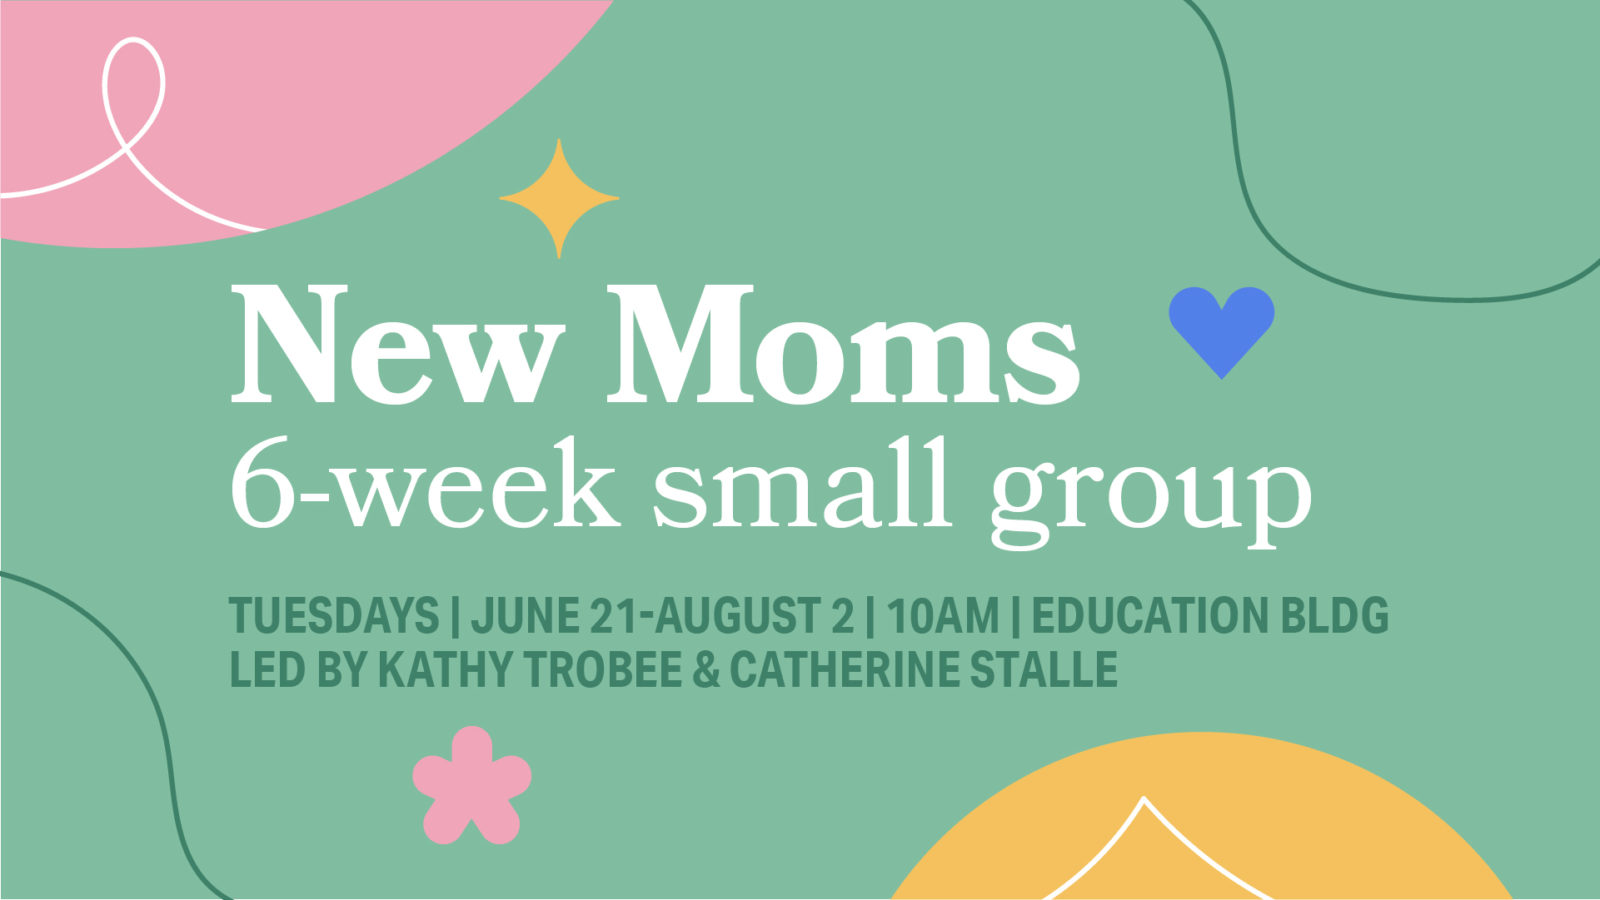 NEW MOMS: 6-WEEK SMALL GROUP